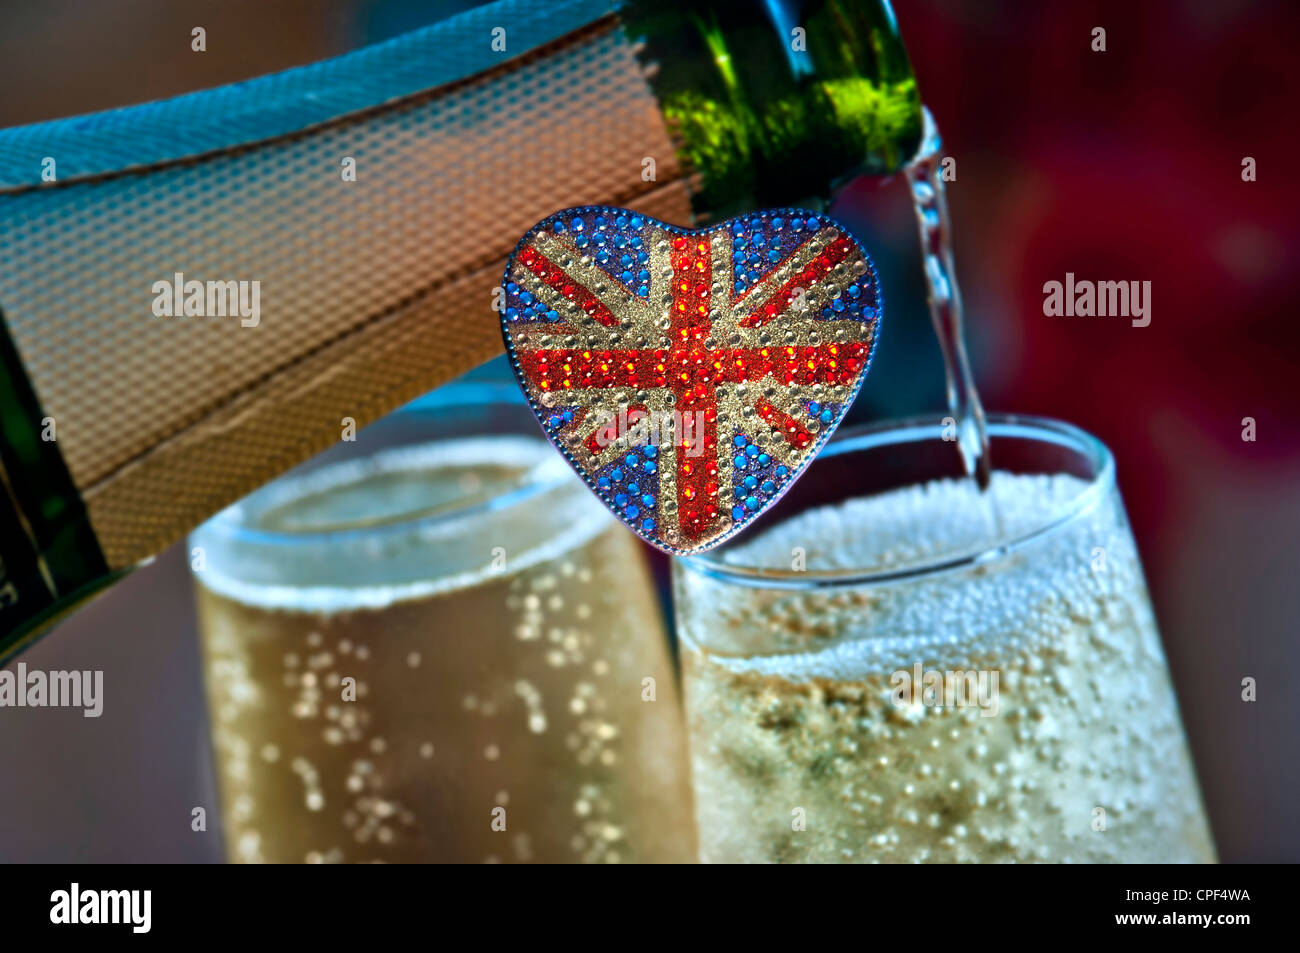 BRITISH SPARKLING WINE with heart shaped sparkling Union Jack Flag motif with bottle pouring glasses of BRITISH English sparkling wine behind UK Stock Photo